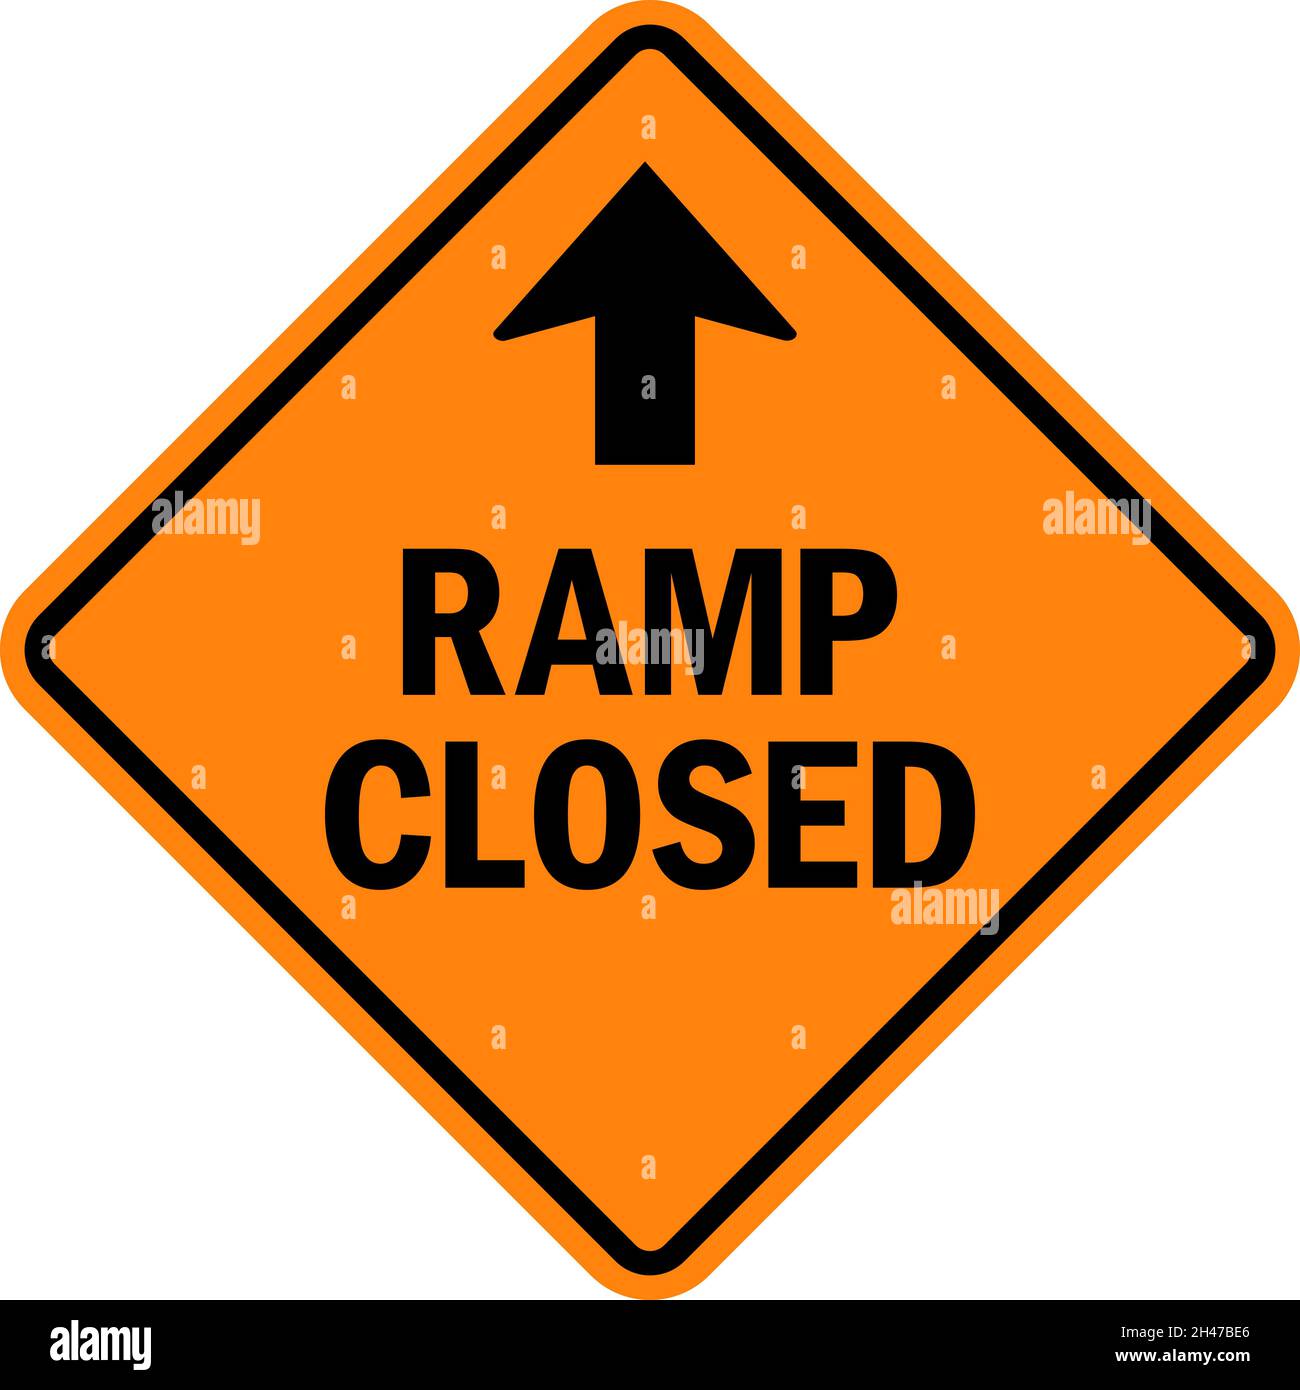 Ramp closed sign. Black on yellow diamond background. Traffic signs and symbols. Stock Vector